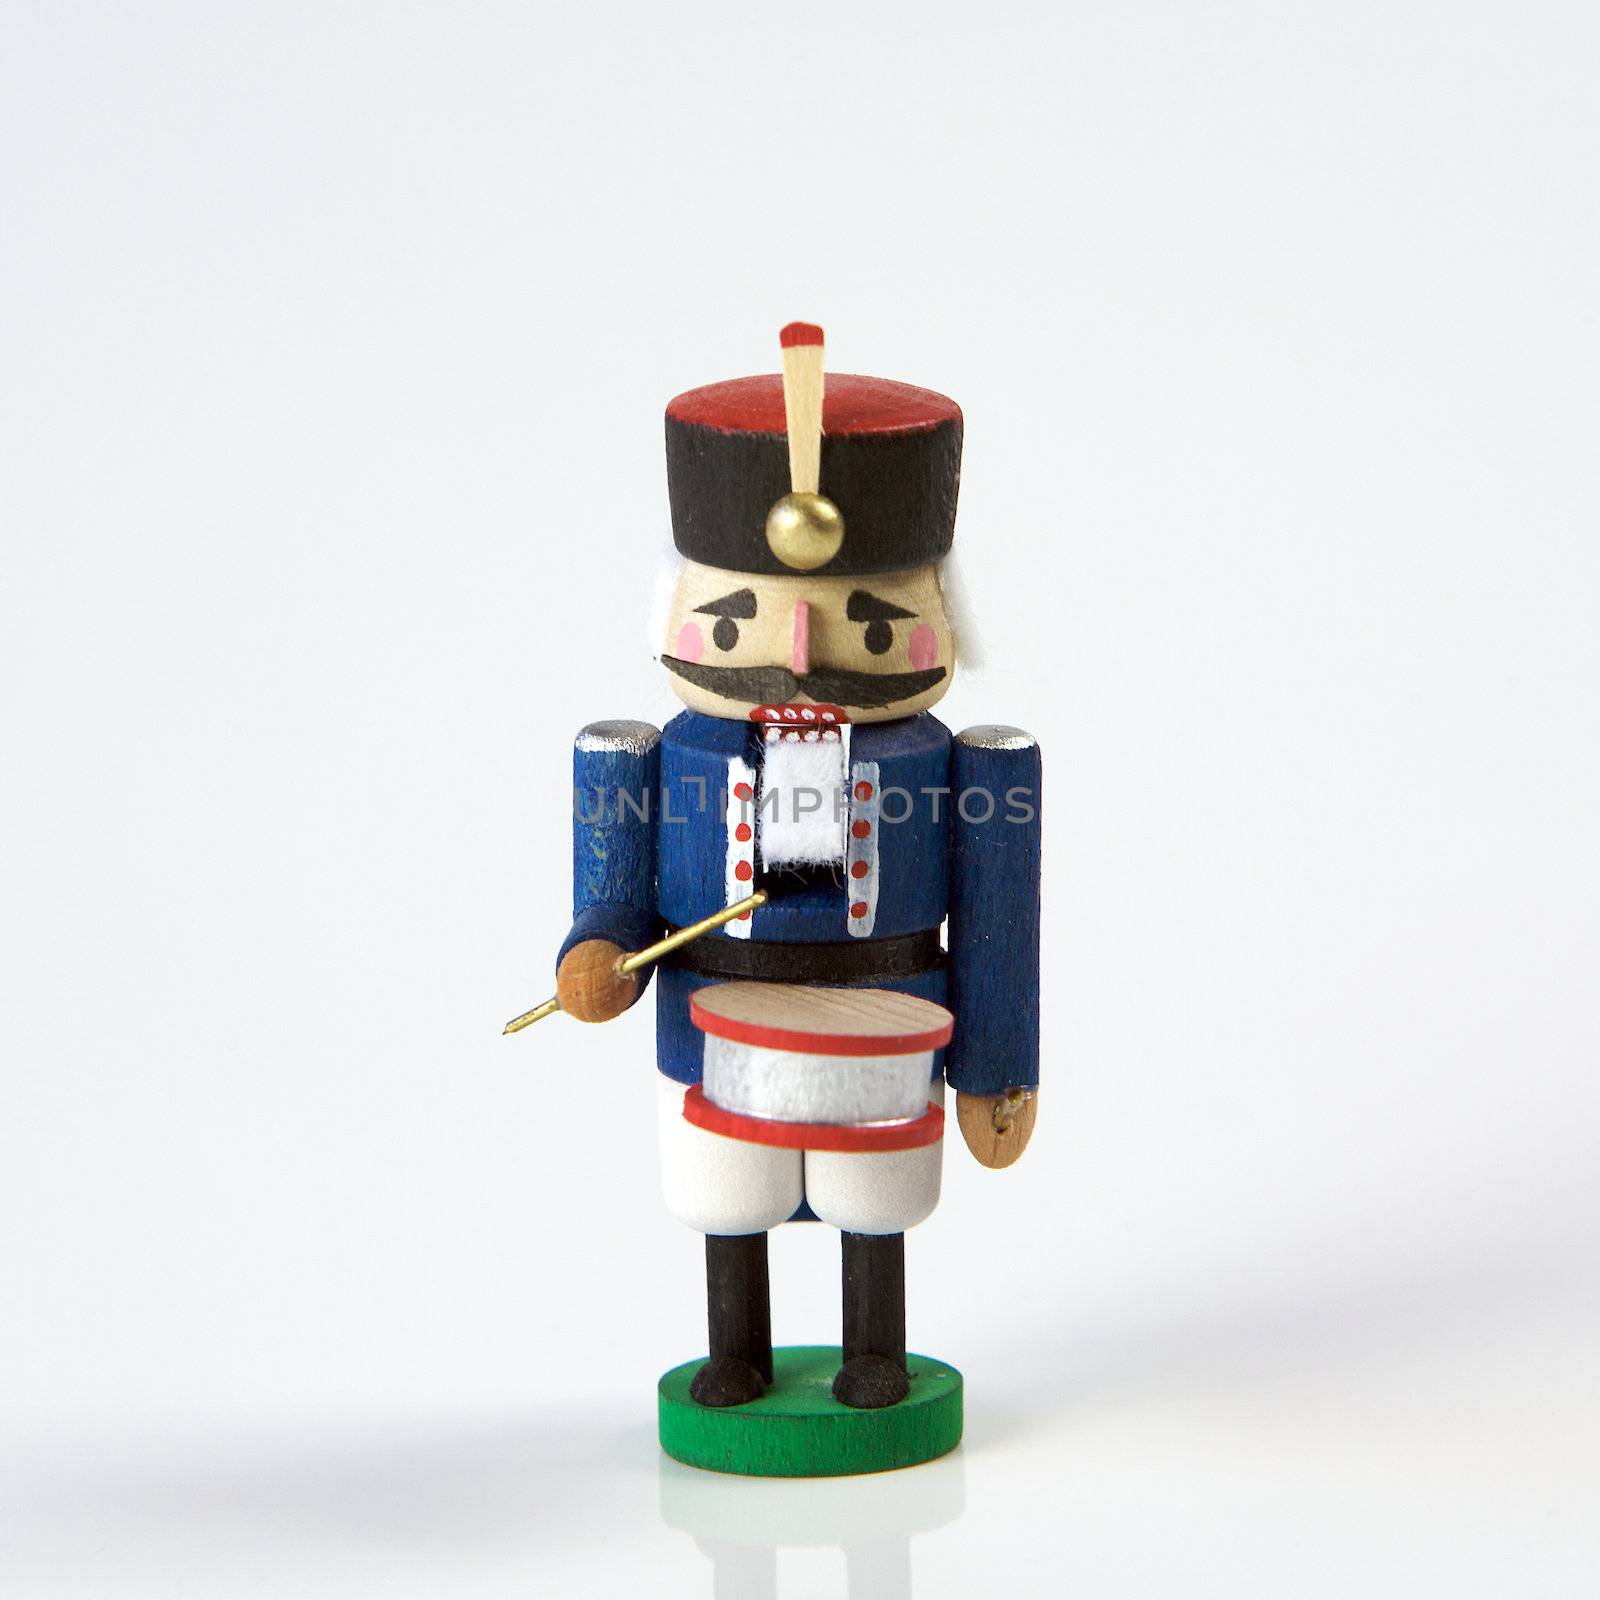 Nutcracker Isolated on a White Background